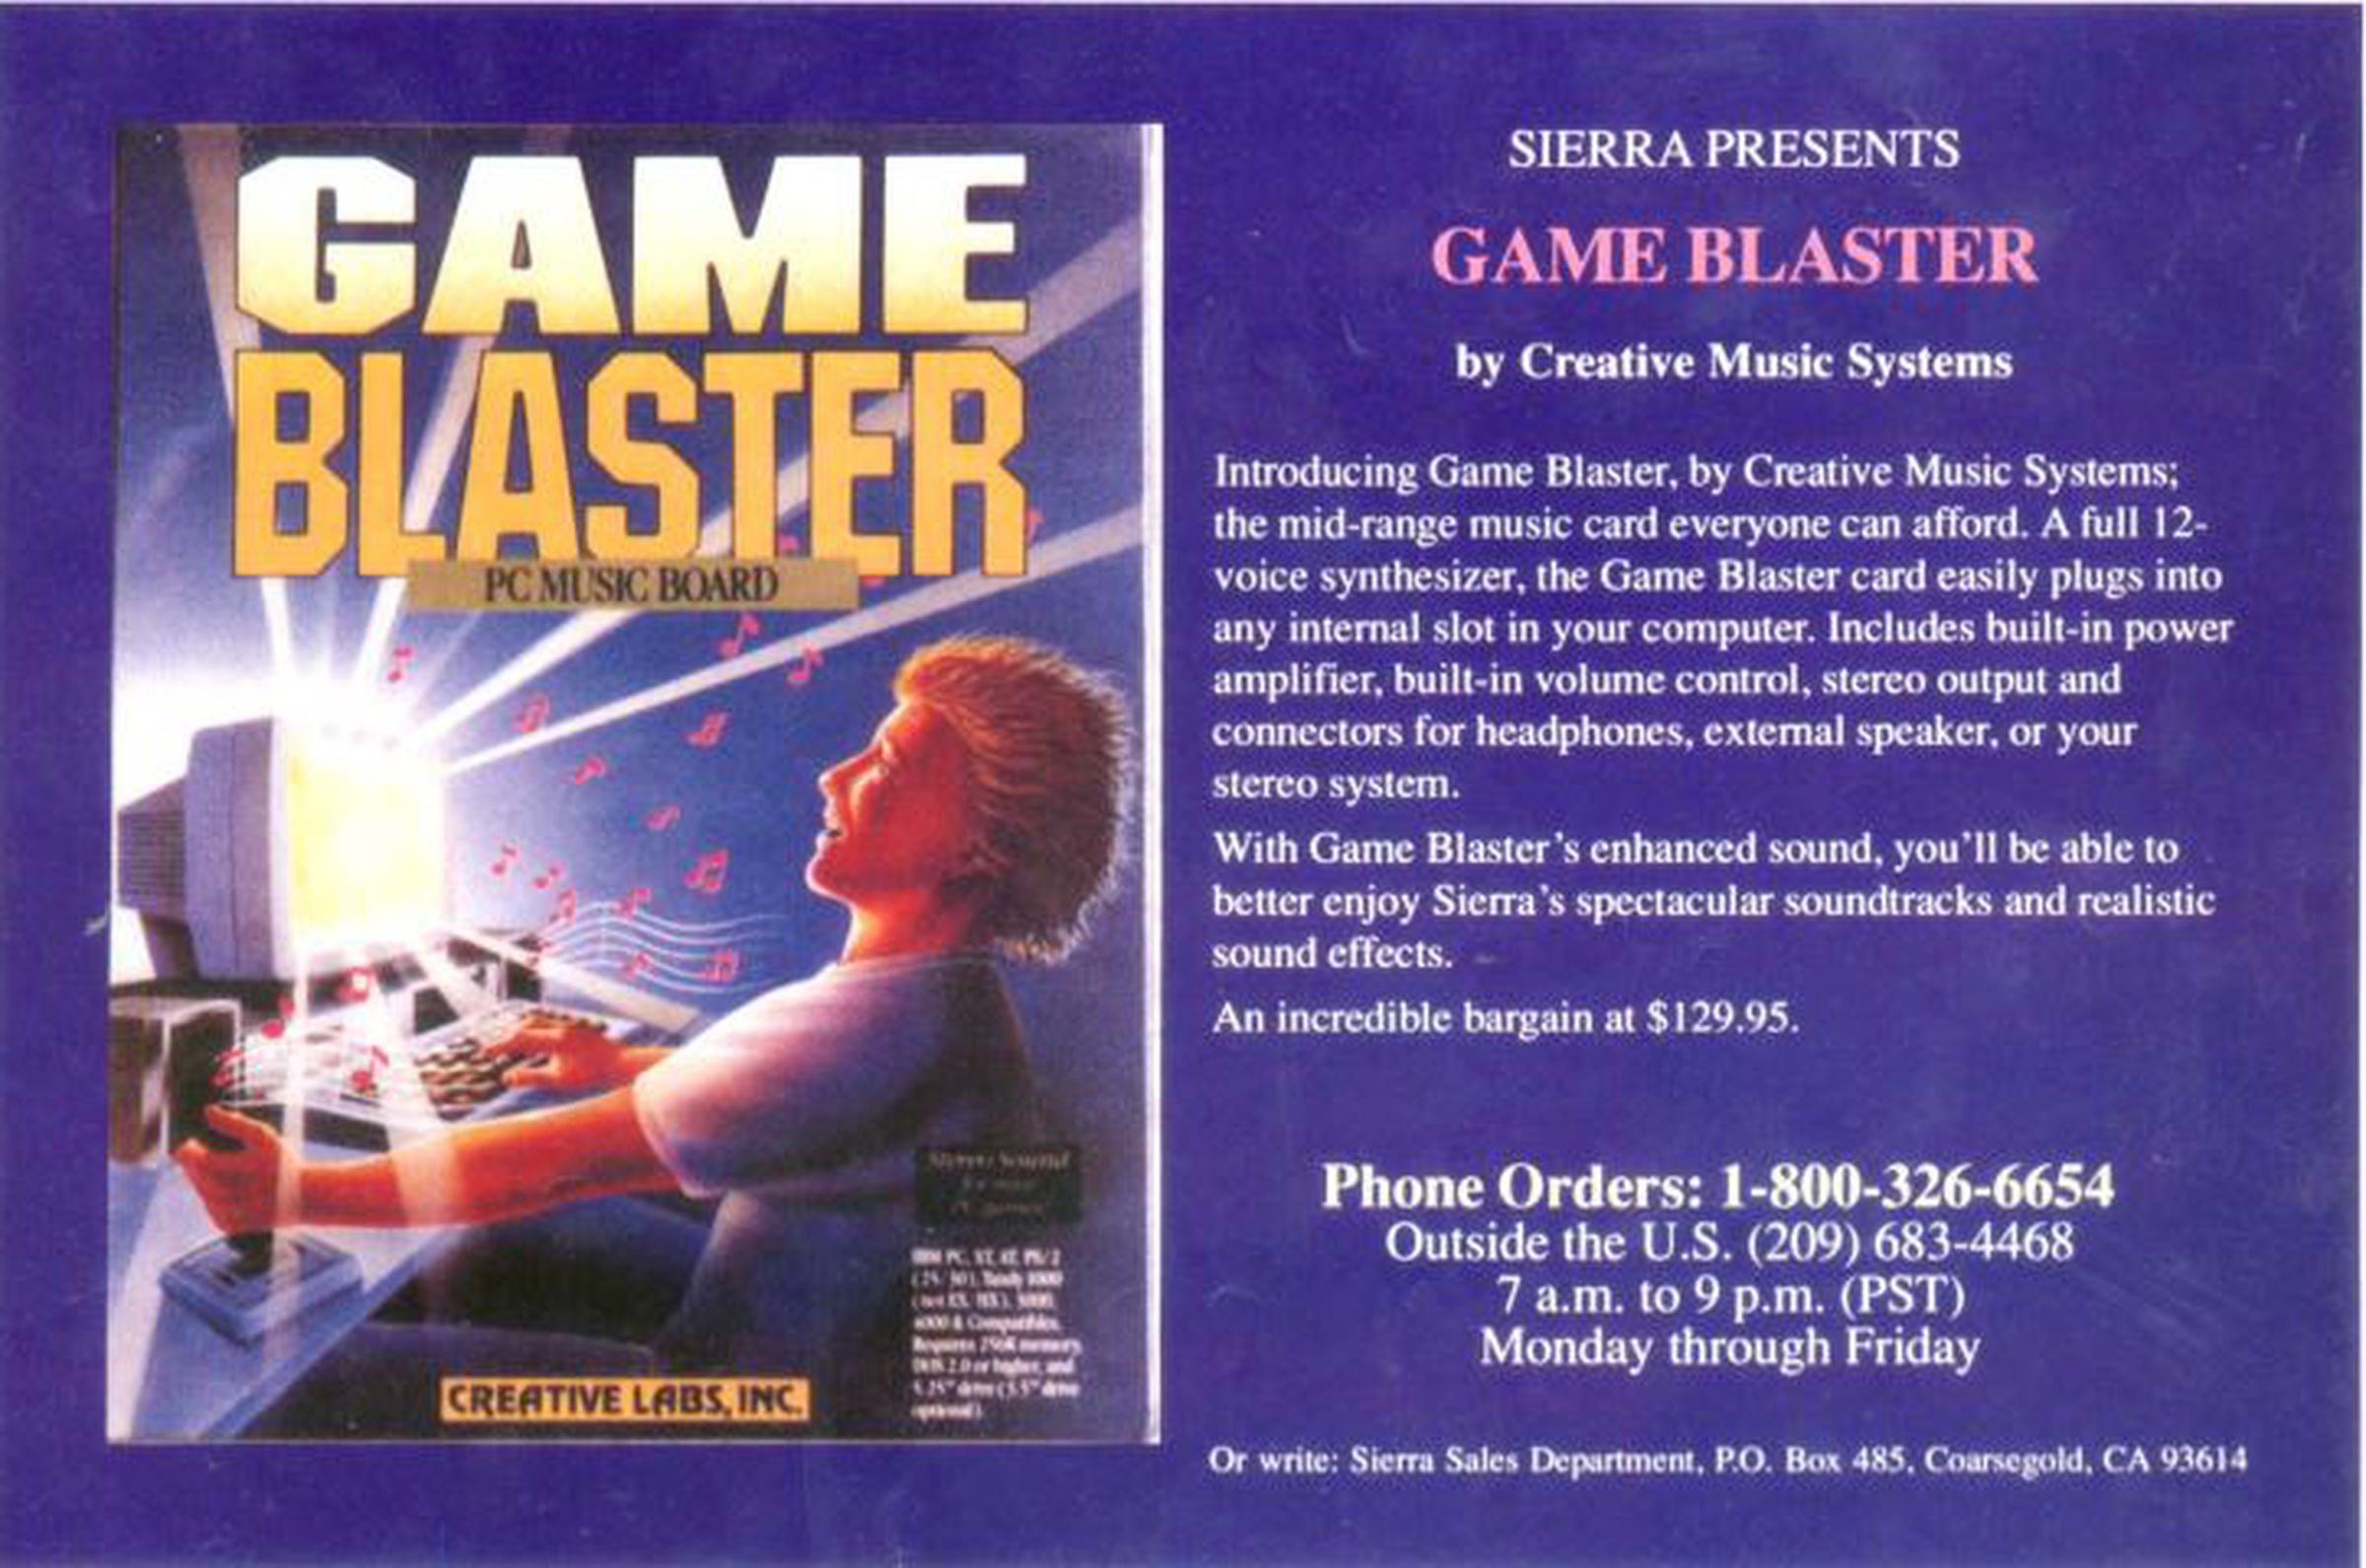 File photo of an advertisement for the Game Blaster PC Music Board.  Reads in part: Sierra Game Blaster presented by Creative Music Systems.  The mid-range music card that everyone can afford.  The Game Blaster, a complete 12-voice sound synthesizer, plugs easily into any internal slot in your computer.  Includes an onboard power amplifier, onboard volume control, stereo output and connectors for headphones, external amplifier, or your stereo system. 